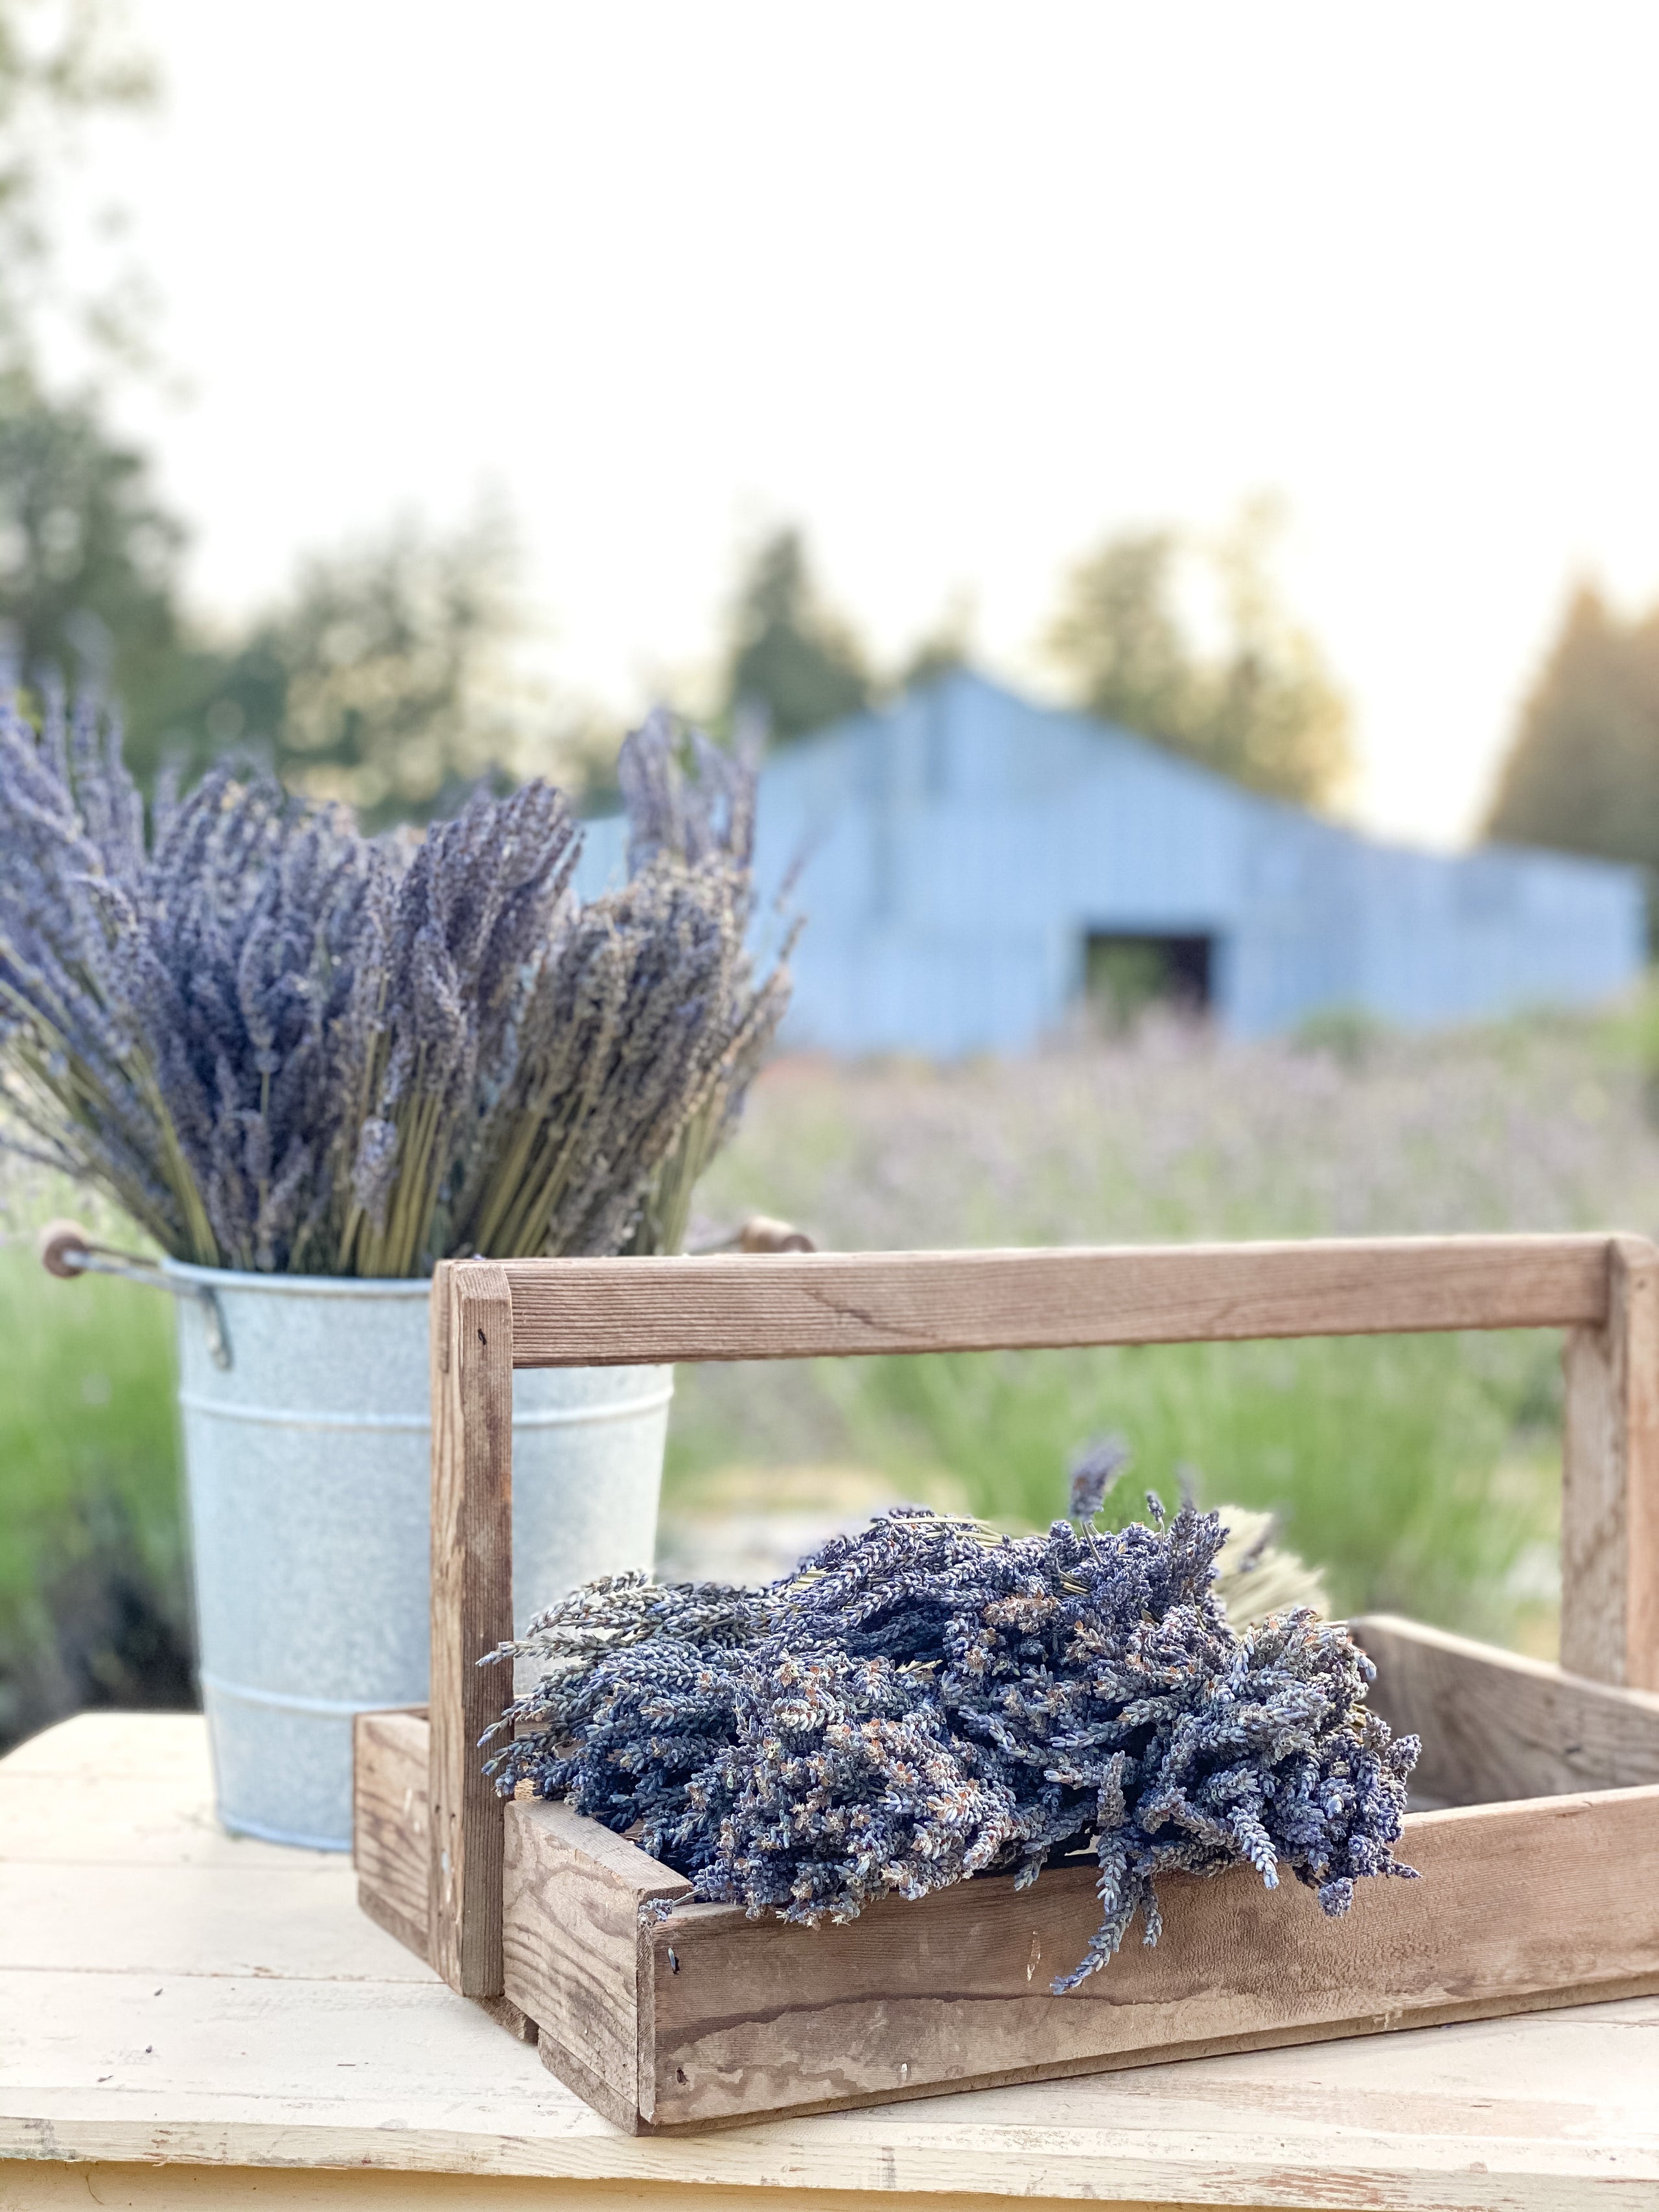 We grow and sell culinary lavender buds in bulk quantity at wholesale